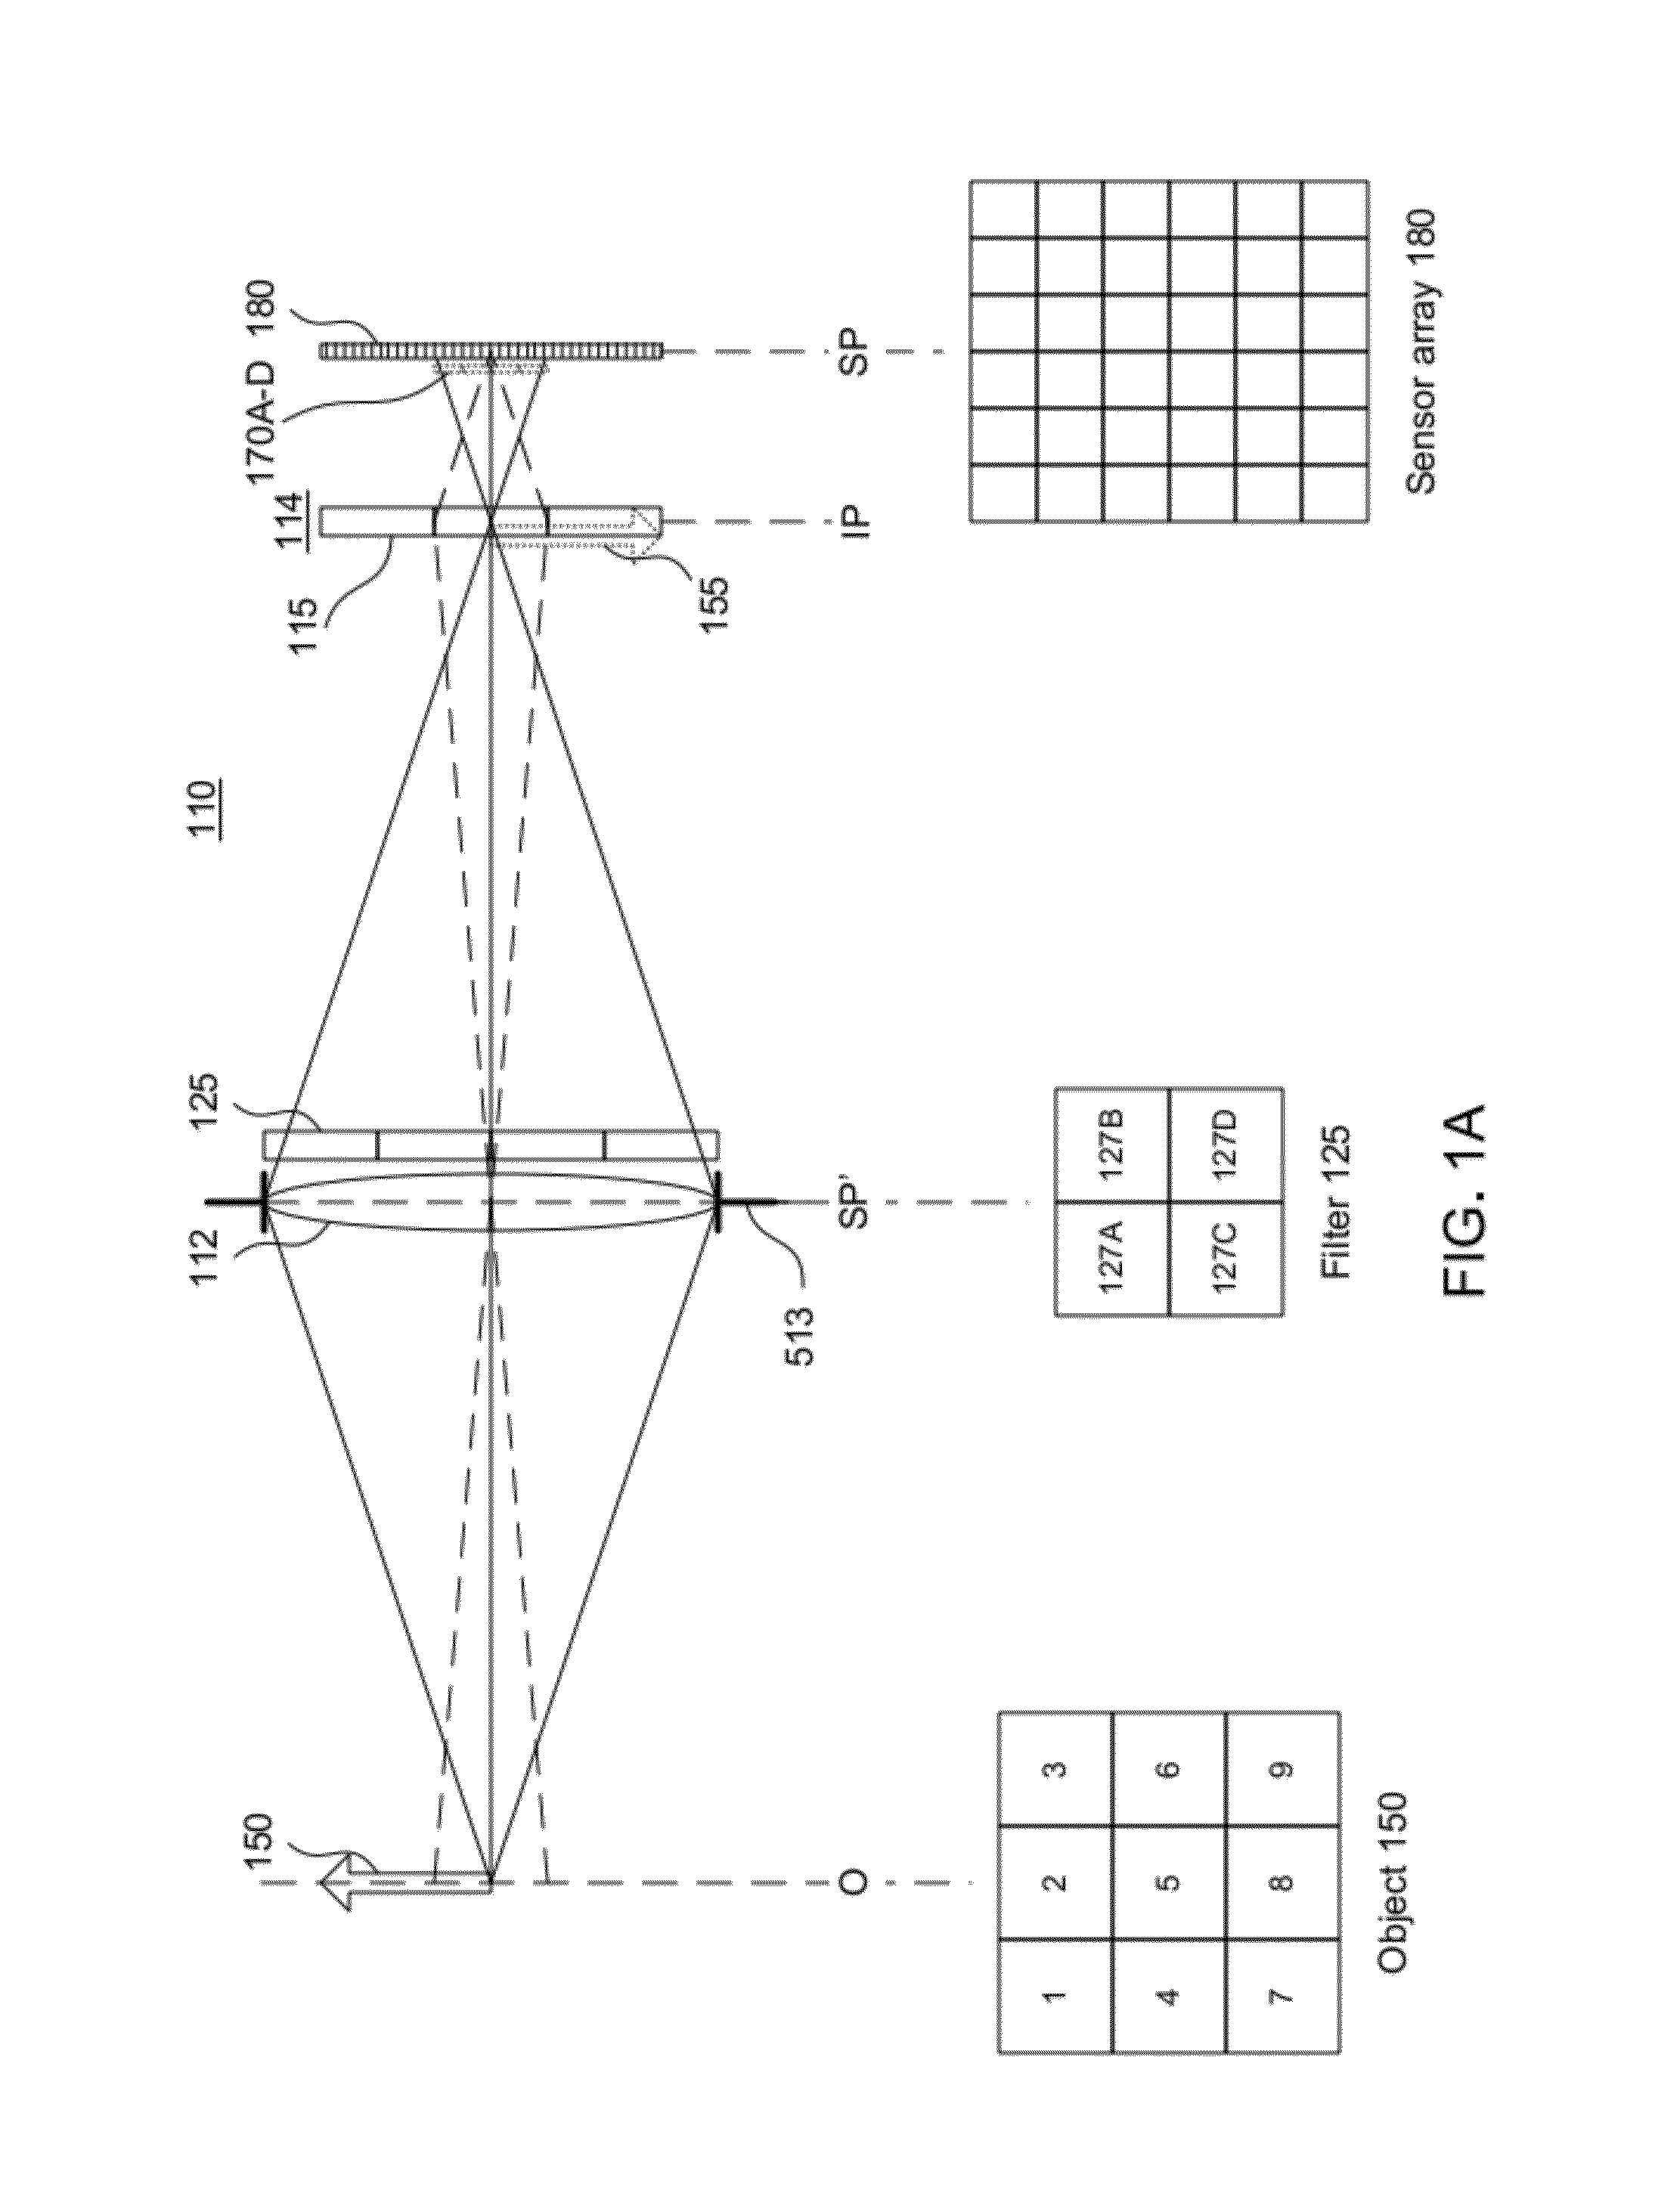 Filter modules for aperture-coded, multiplexed imaging systems